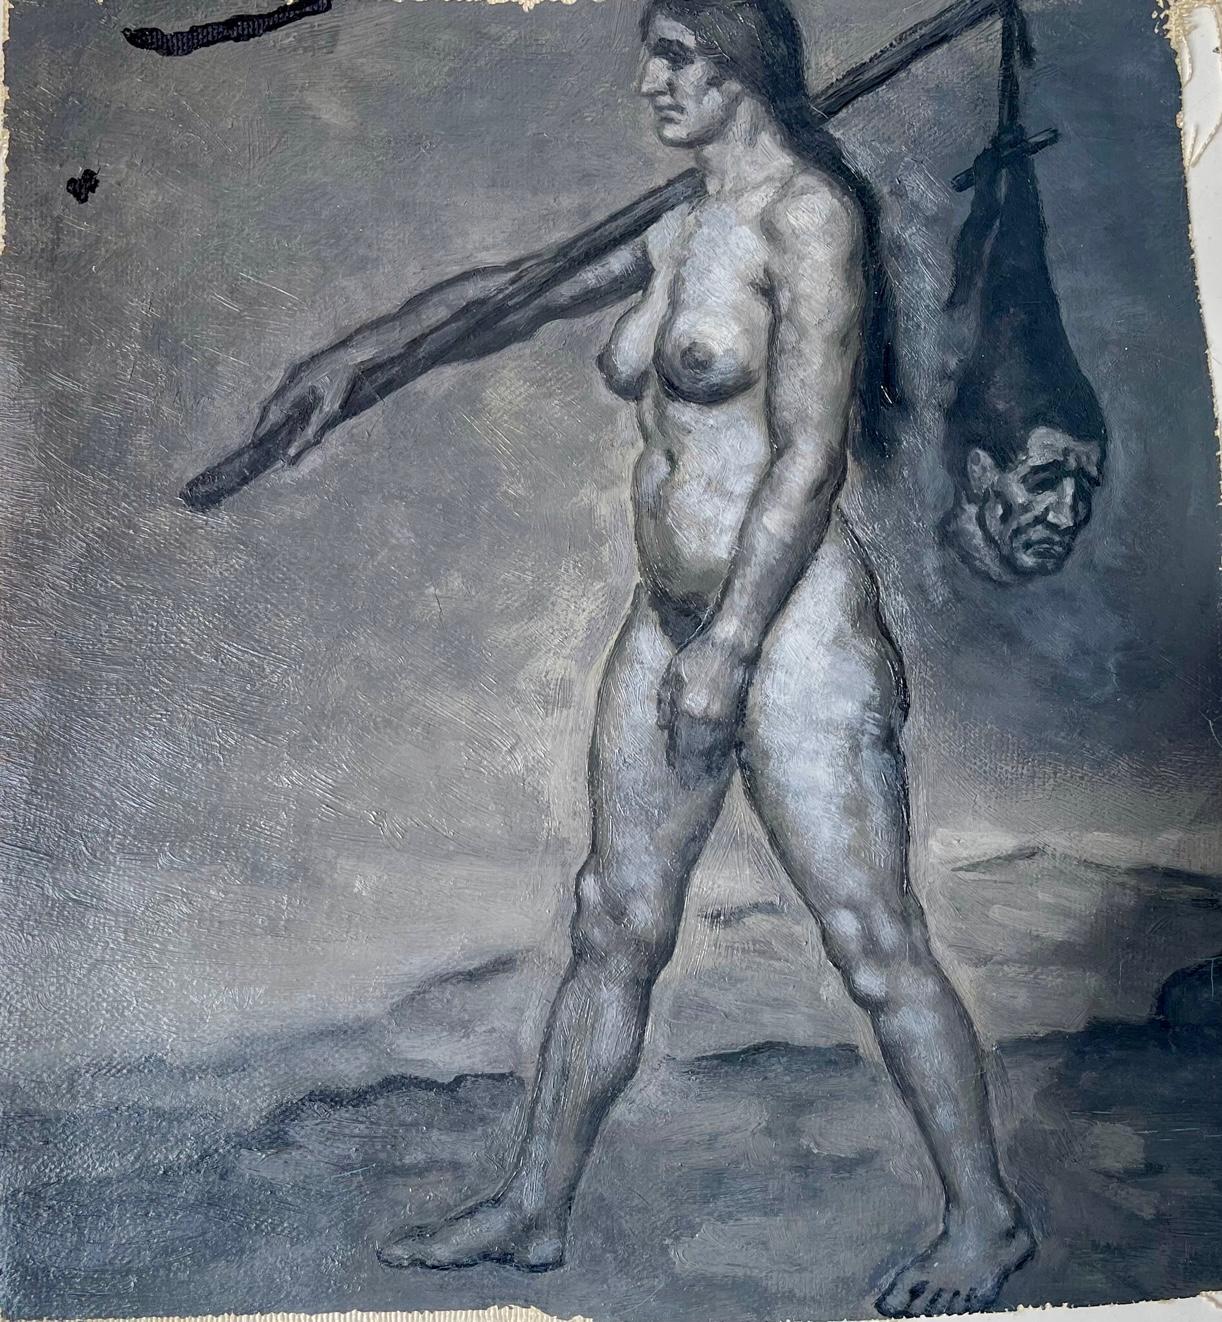 A strikingly brutal piece that raises more questions than answers. It was painted during the early 1940s by the German relatively unknown artist Franz Kofron. The fragment has been cut out of a larger subject/motif. Either due to censor or the